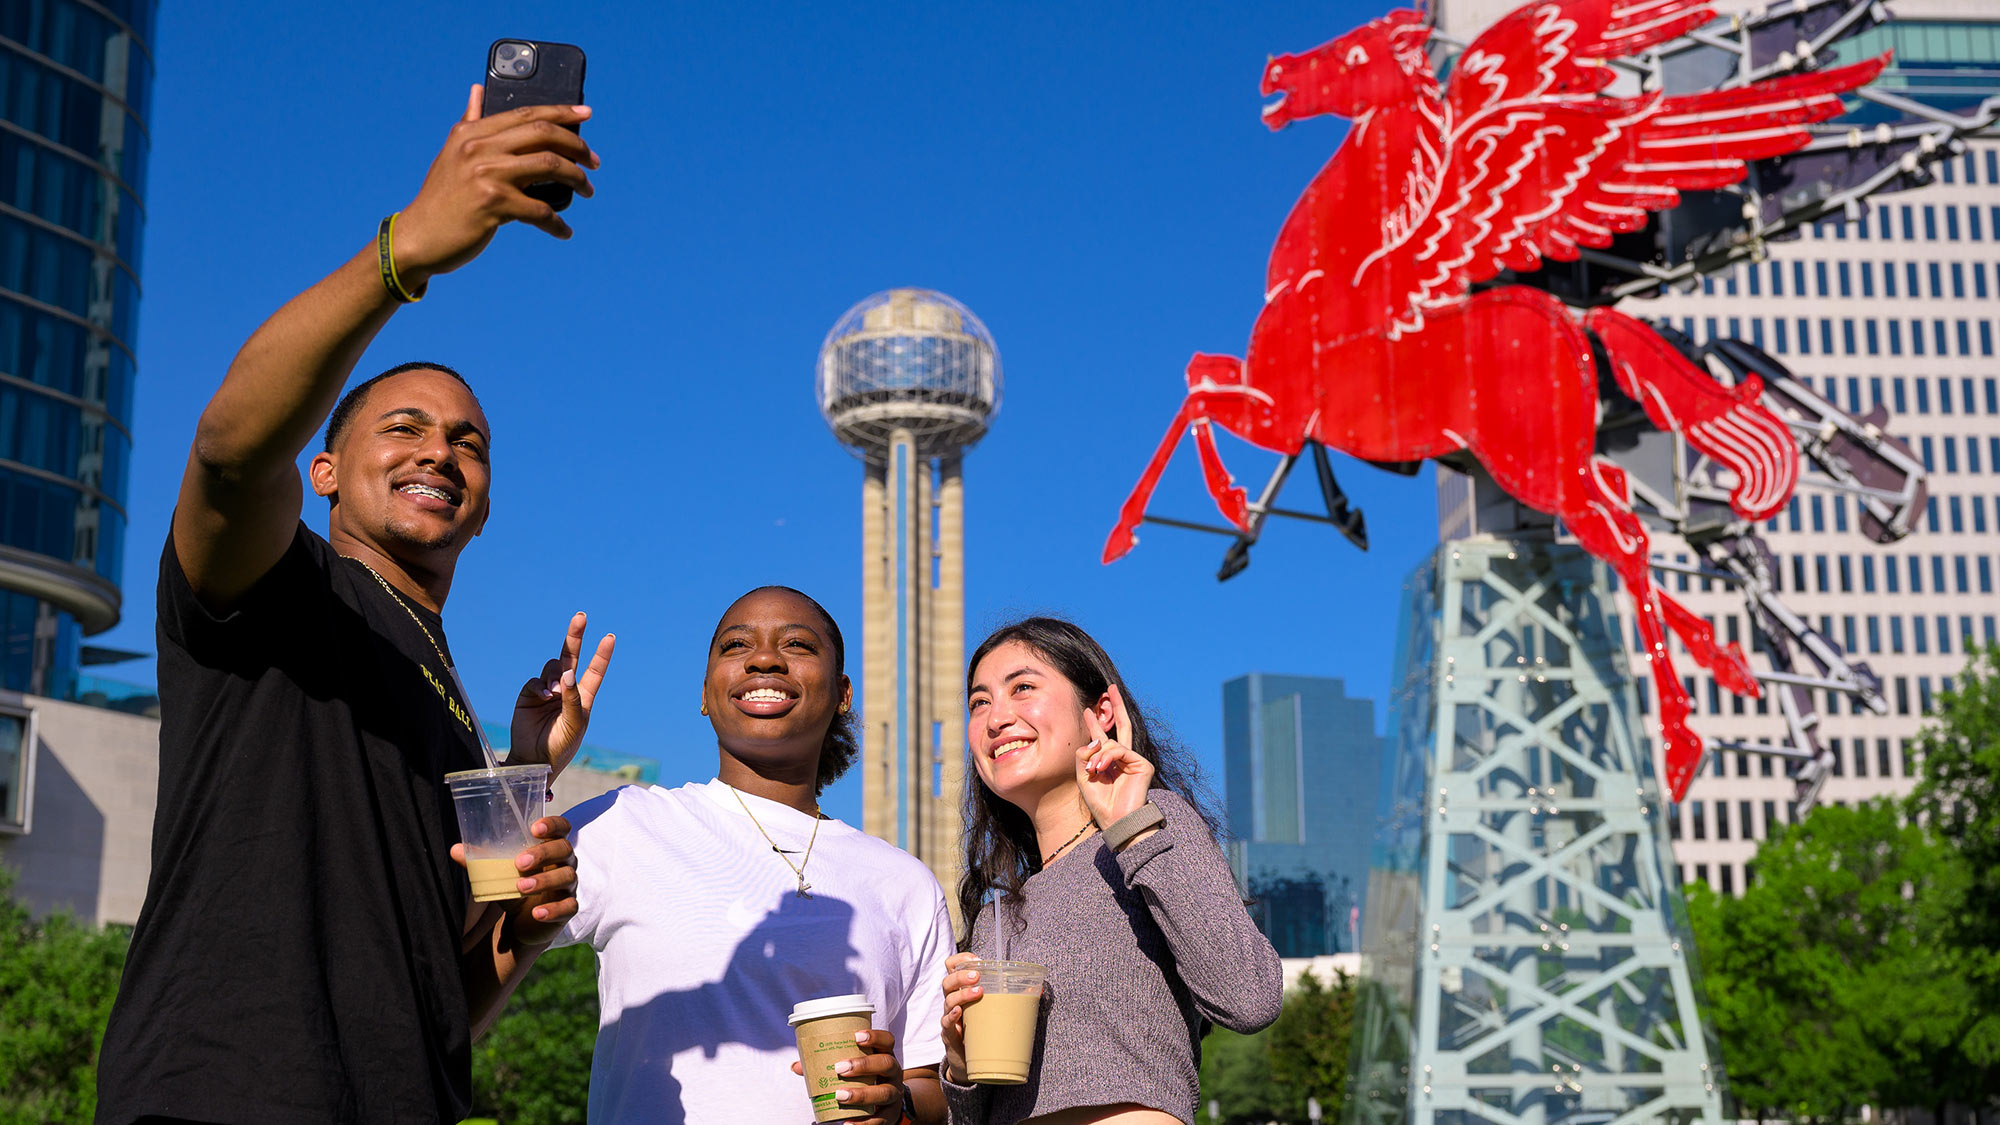 SMU students taking a selfie while visiting downtown Dallas.